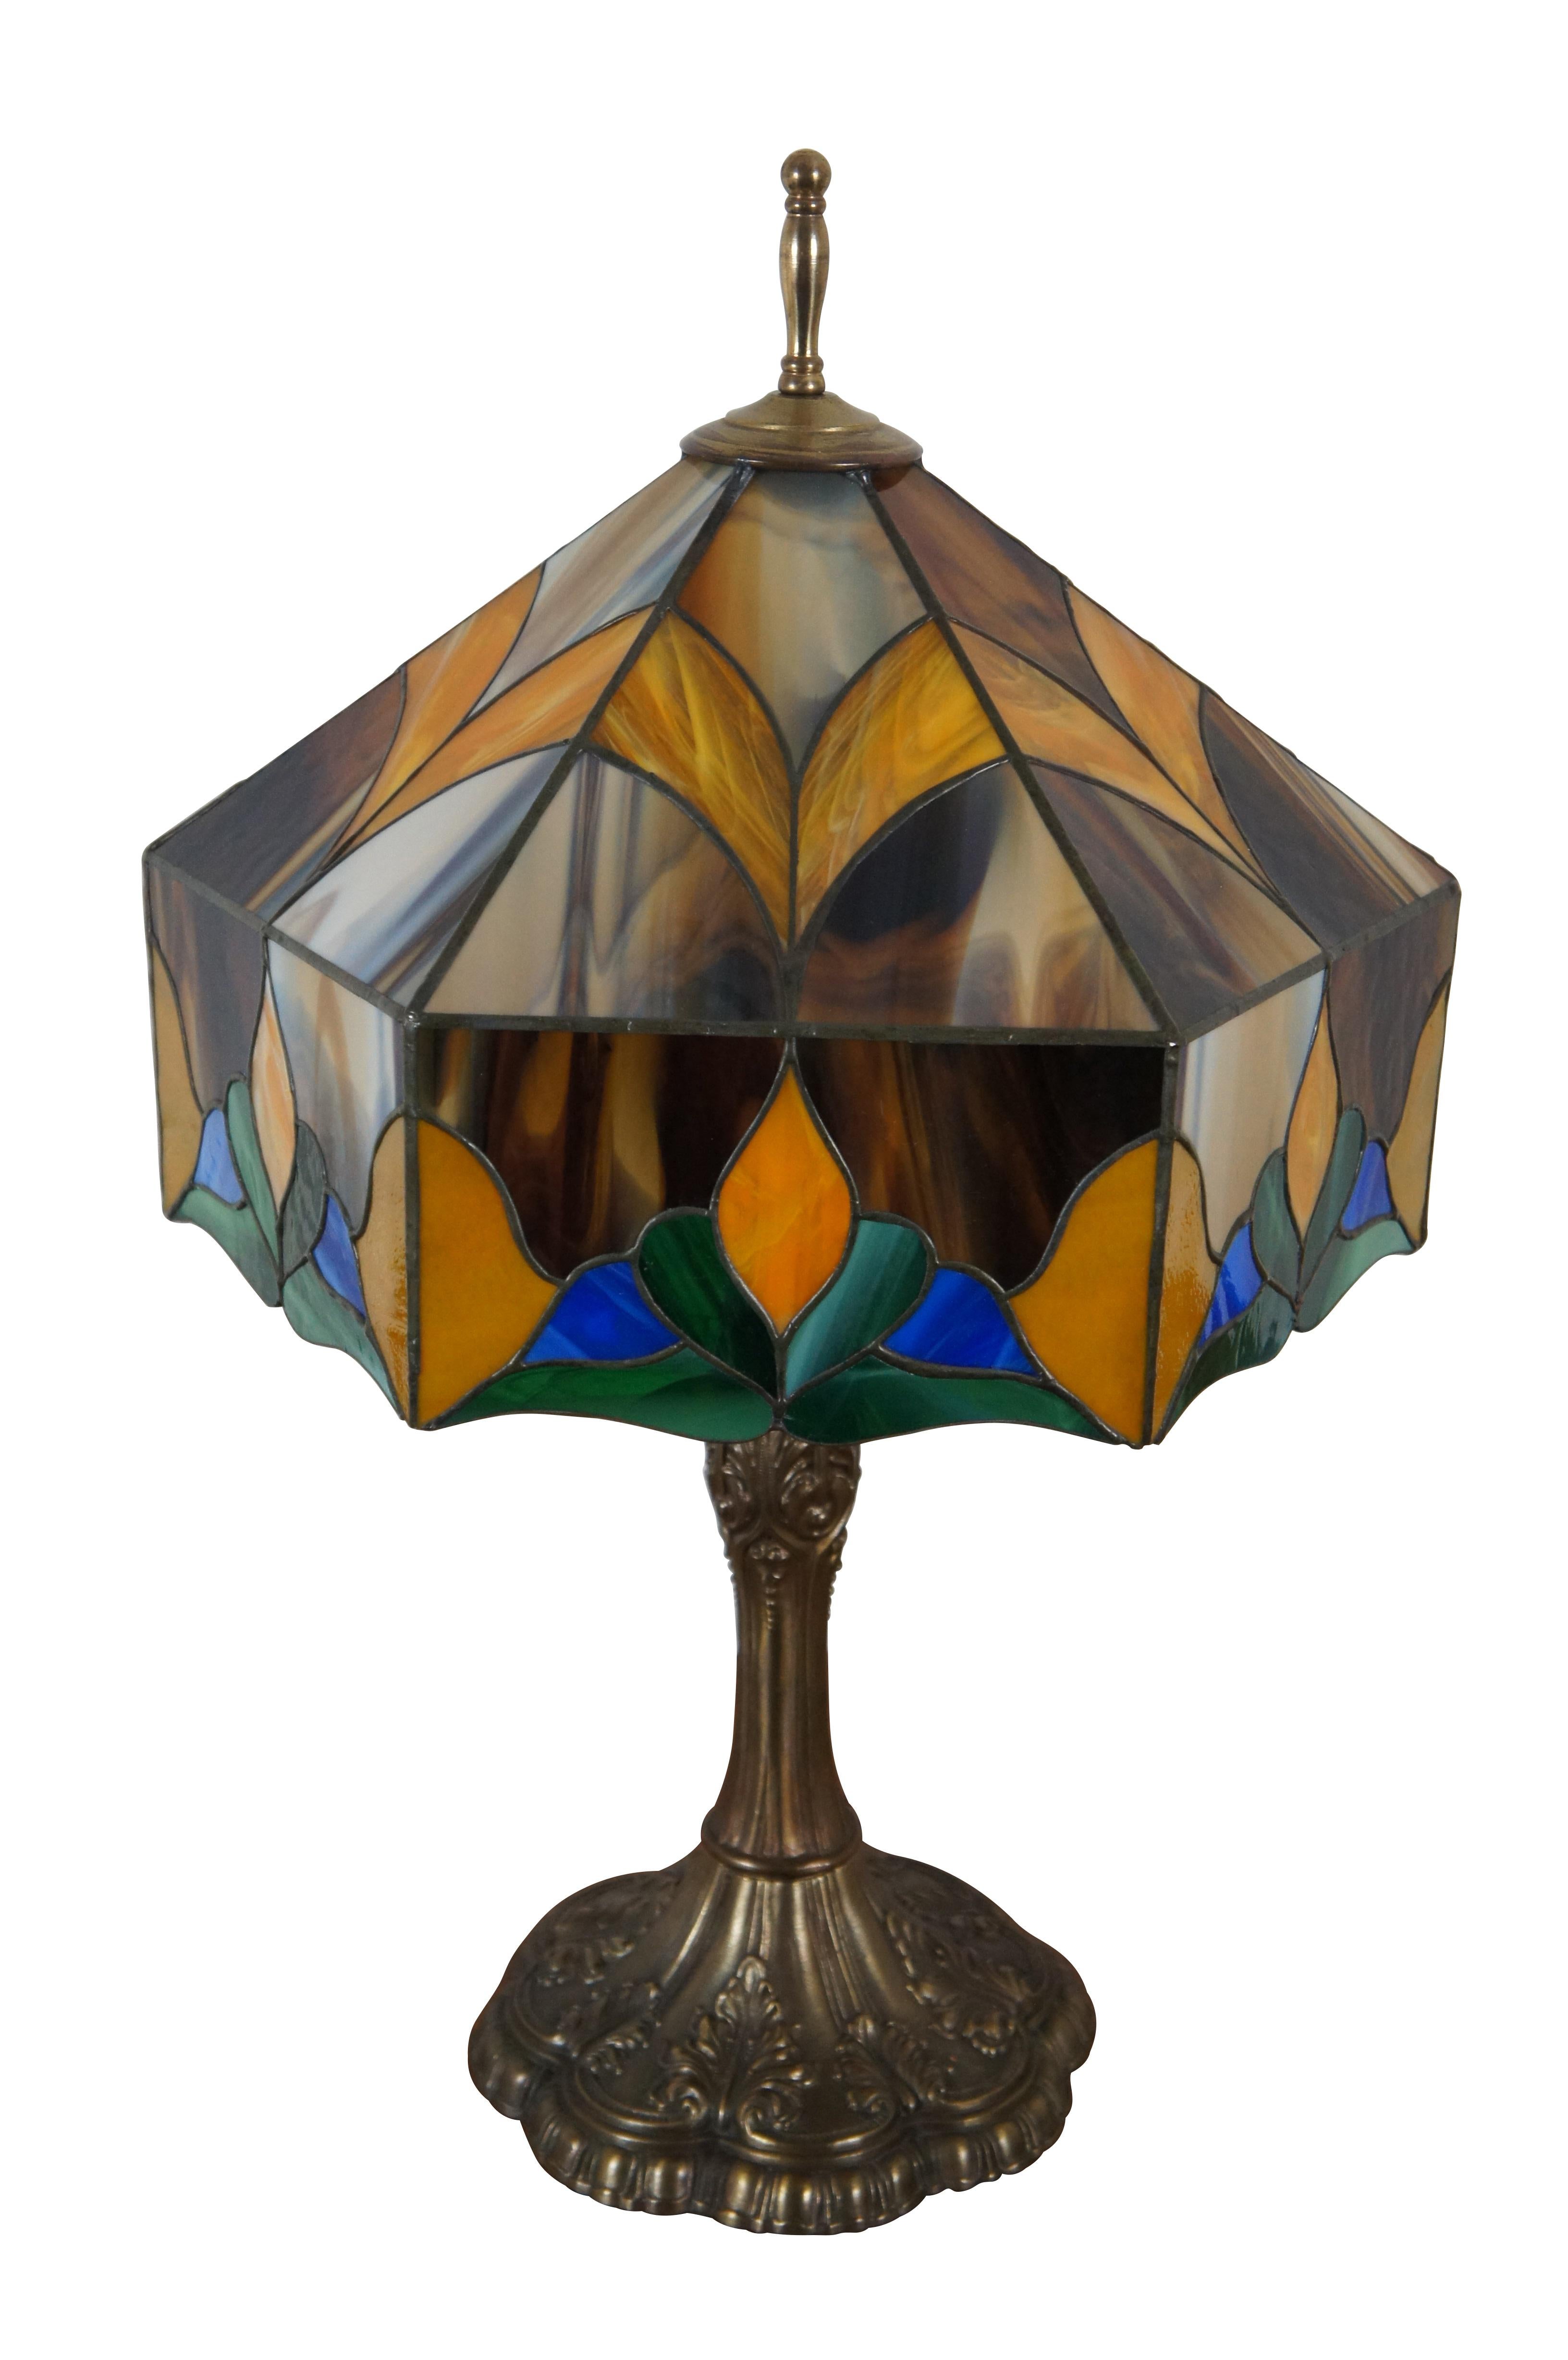 Vintage Tiffany style stained slag glass two light parlor table lamp featuring Art Nouveau styling with beautiful abstract floral design shade of blues, greens, orange and tortoise brown supported by a tapered and scalloped acanthus